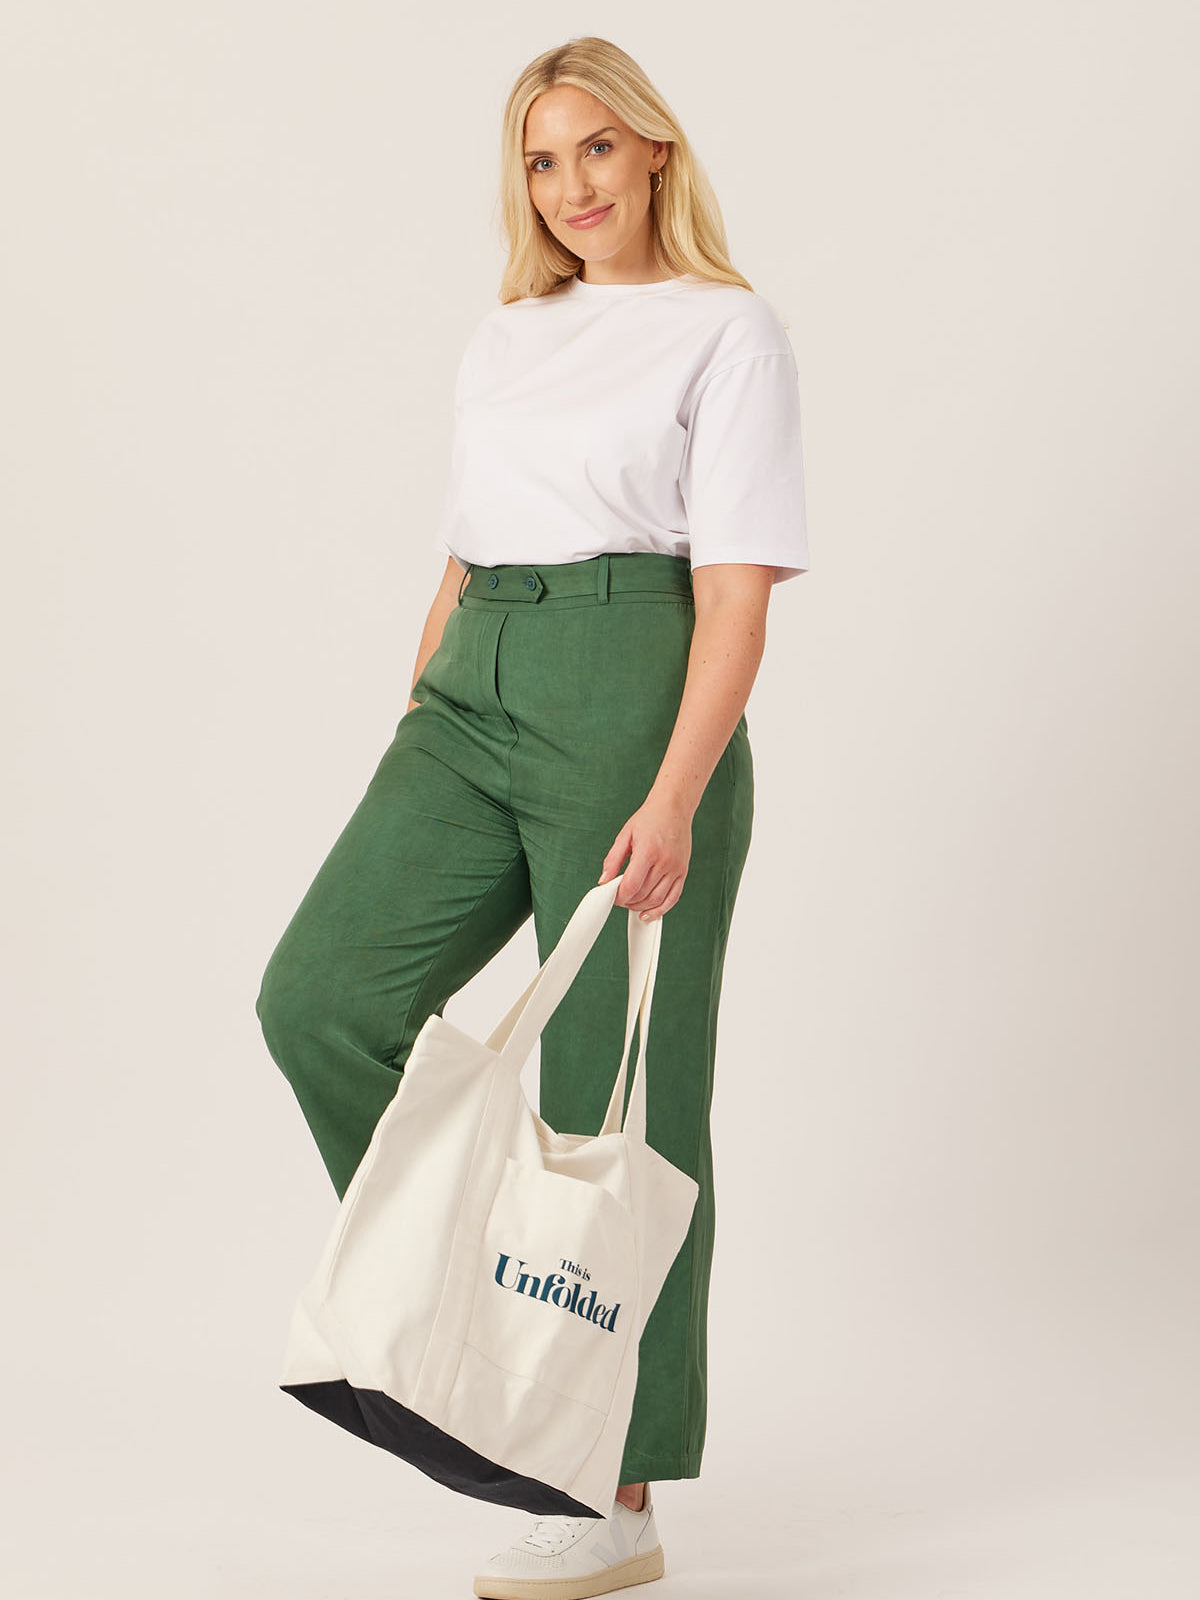 A model carries the Joey bag in their hand whilst wearing the white Penny t-shirt and olive Beth trousers, pictured against a white backdrop. 